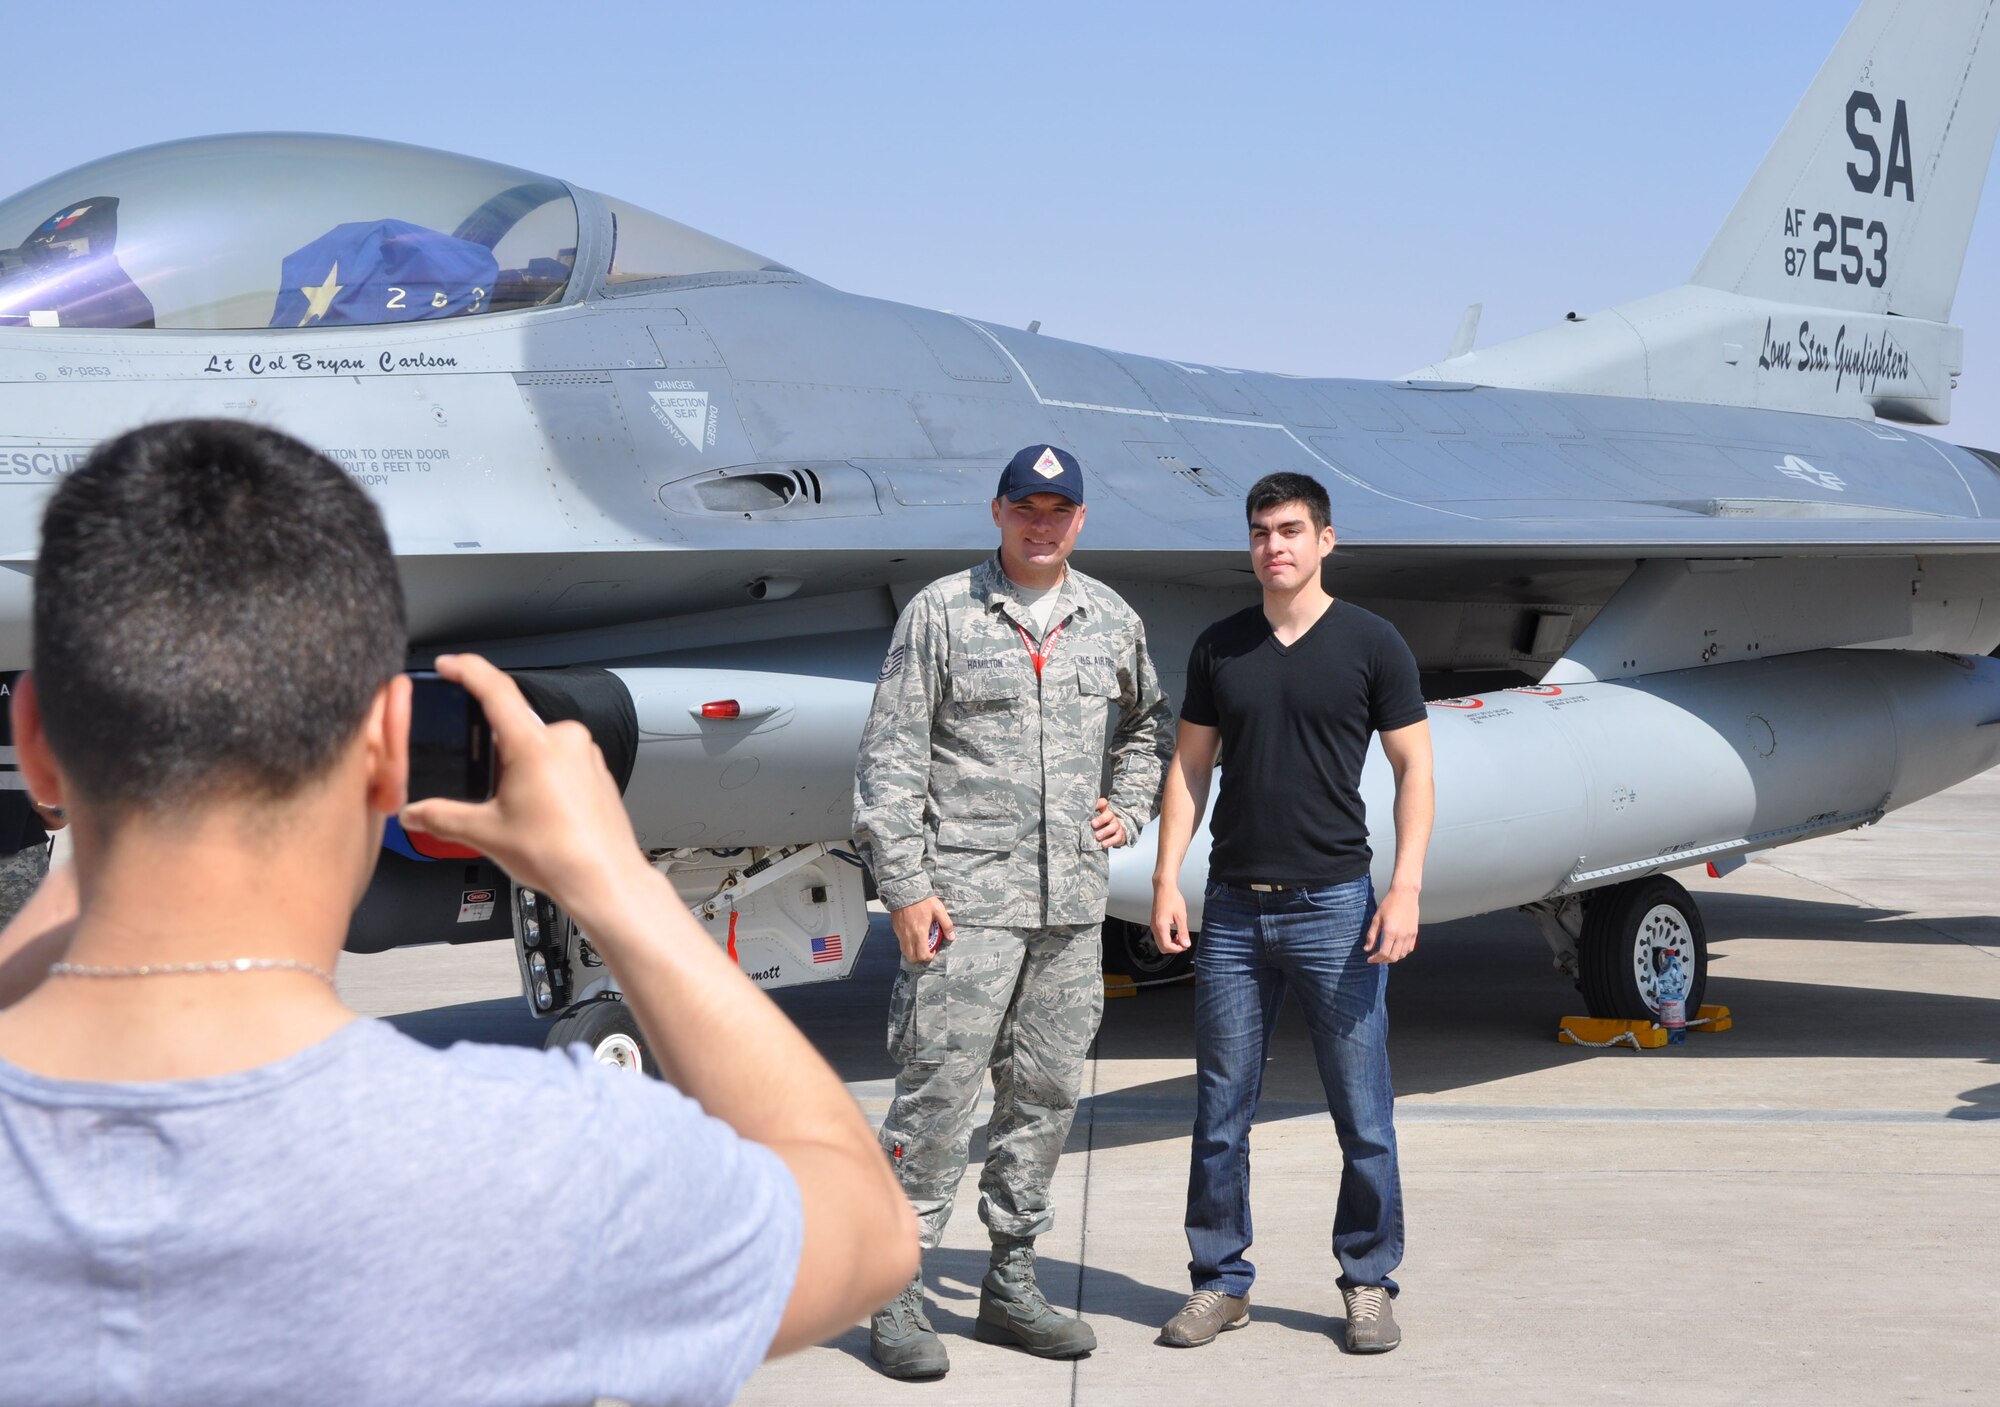 Tech. Sgt. Christopher Hamilton, from the Texas Air National Guard's 149th Fighter Wing at Joint Base San Antonio, Texas, poses for a photo with a member of the Chilean armed forces during an Open Day at Exercise Salitre 2014. The exercise, hosted by the Chilean air force, also involves the air forces of the U.S., Brazil, Argentina and Uruguay and focuses on enhancing interoperability between the participating nations. Exercise Salitre 2014 wraps up October 16. (U.S. Air Force photo by Capt. Bryan Bouchard/Released)